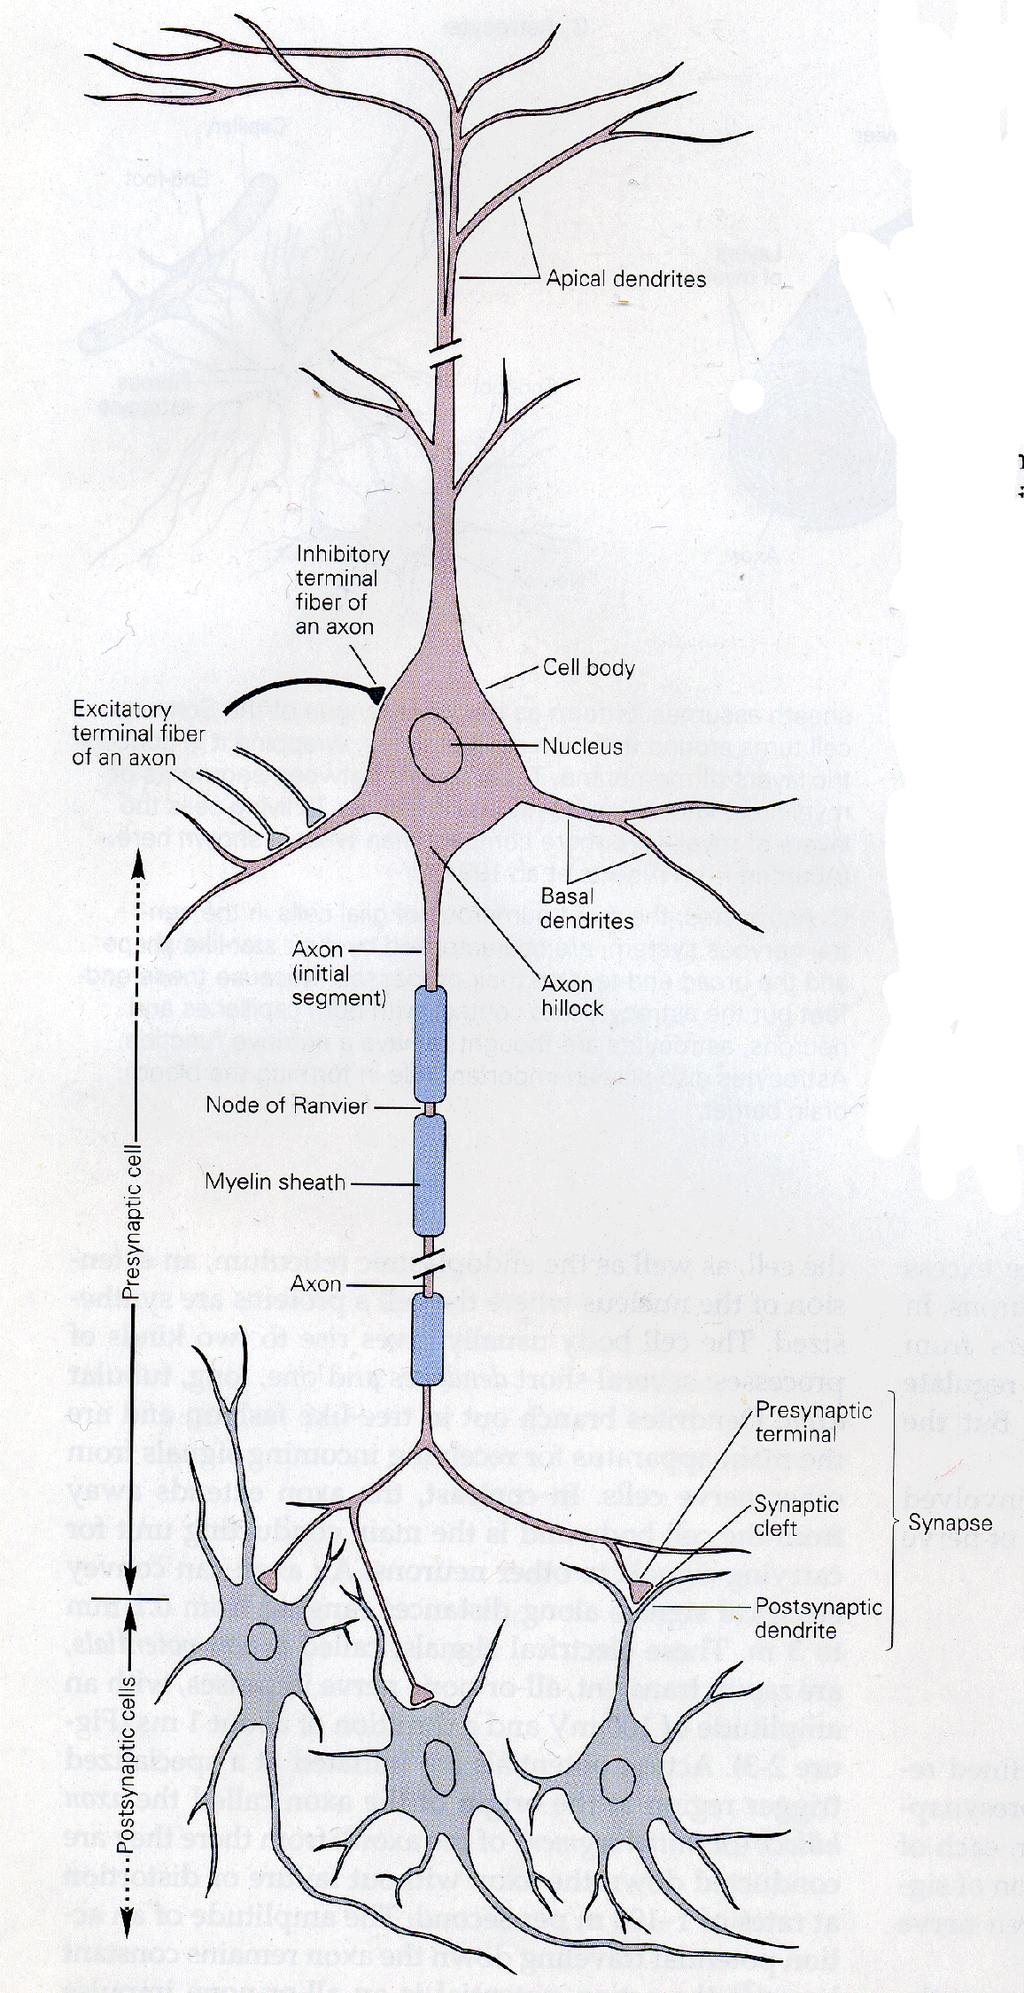 Cellular Architecture of a Neuron Dendrites: neuronal process that receives information output from other neurons upstream in the circuit. Soma: cell body of the neuron.